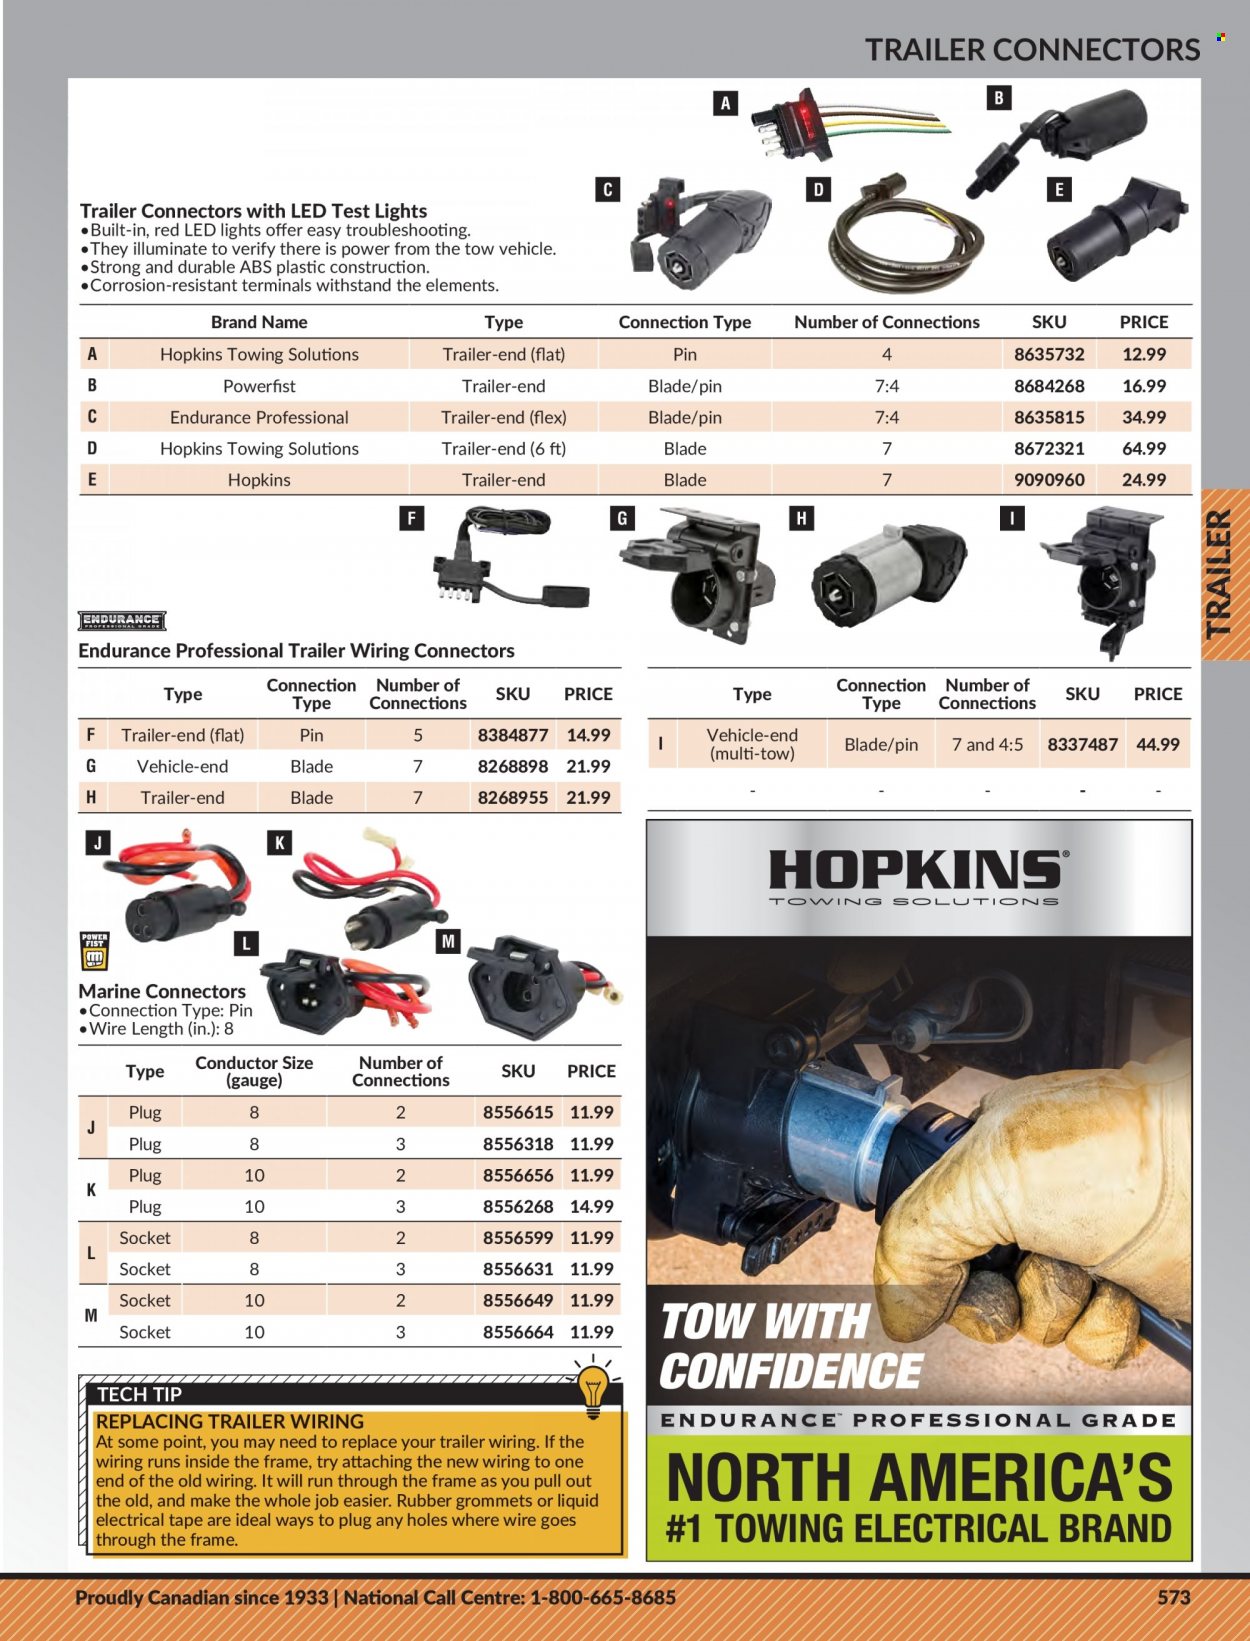 thumbnail - Princess Auto Flyer - Sales products - LED light, socket, trailer, vehicle. Page 583.